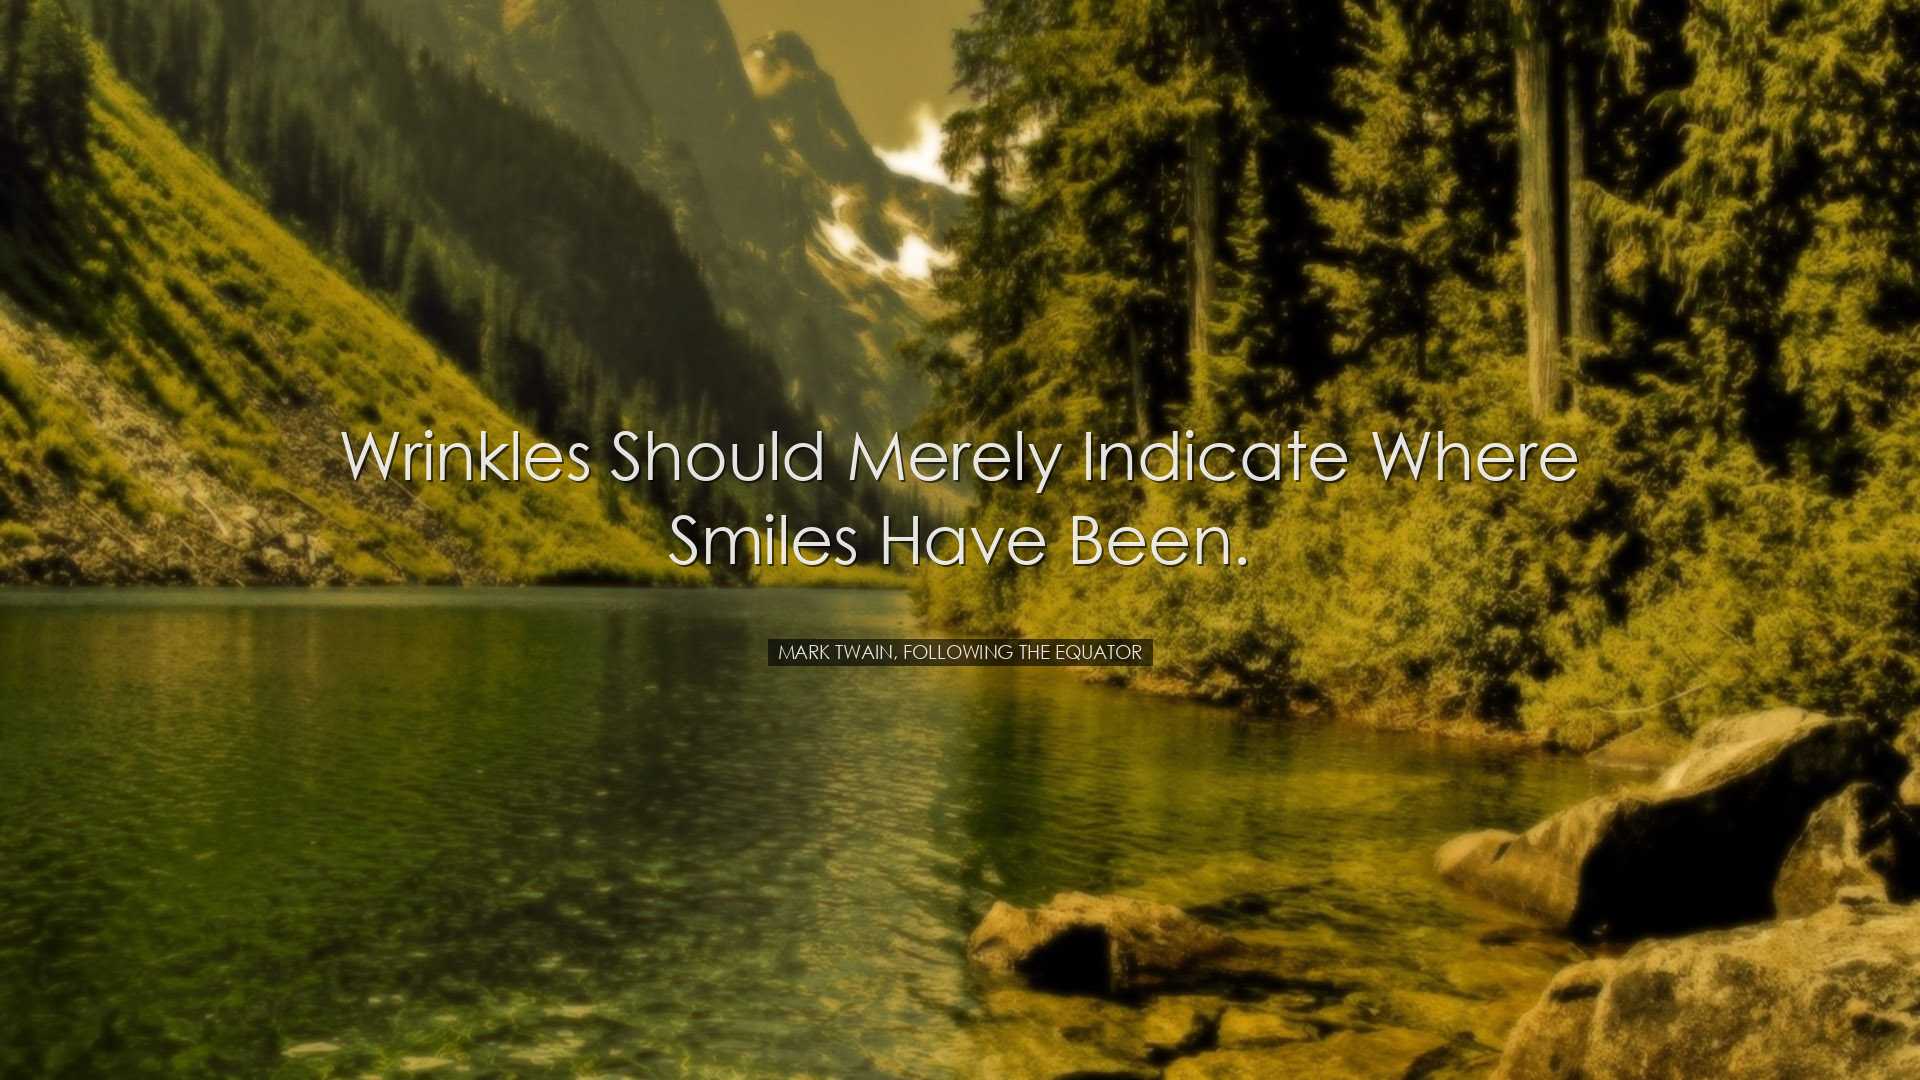 Wrinkles should merely indicate where smiles have been. - Mark Twa